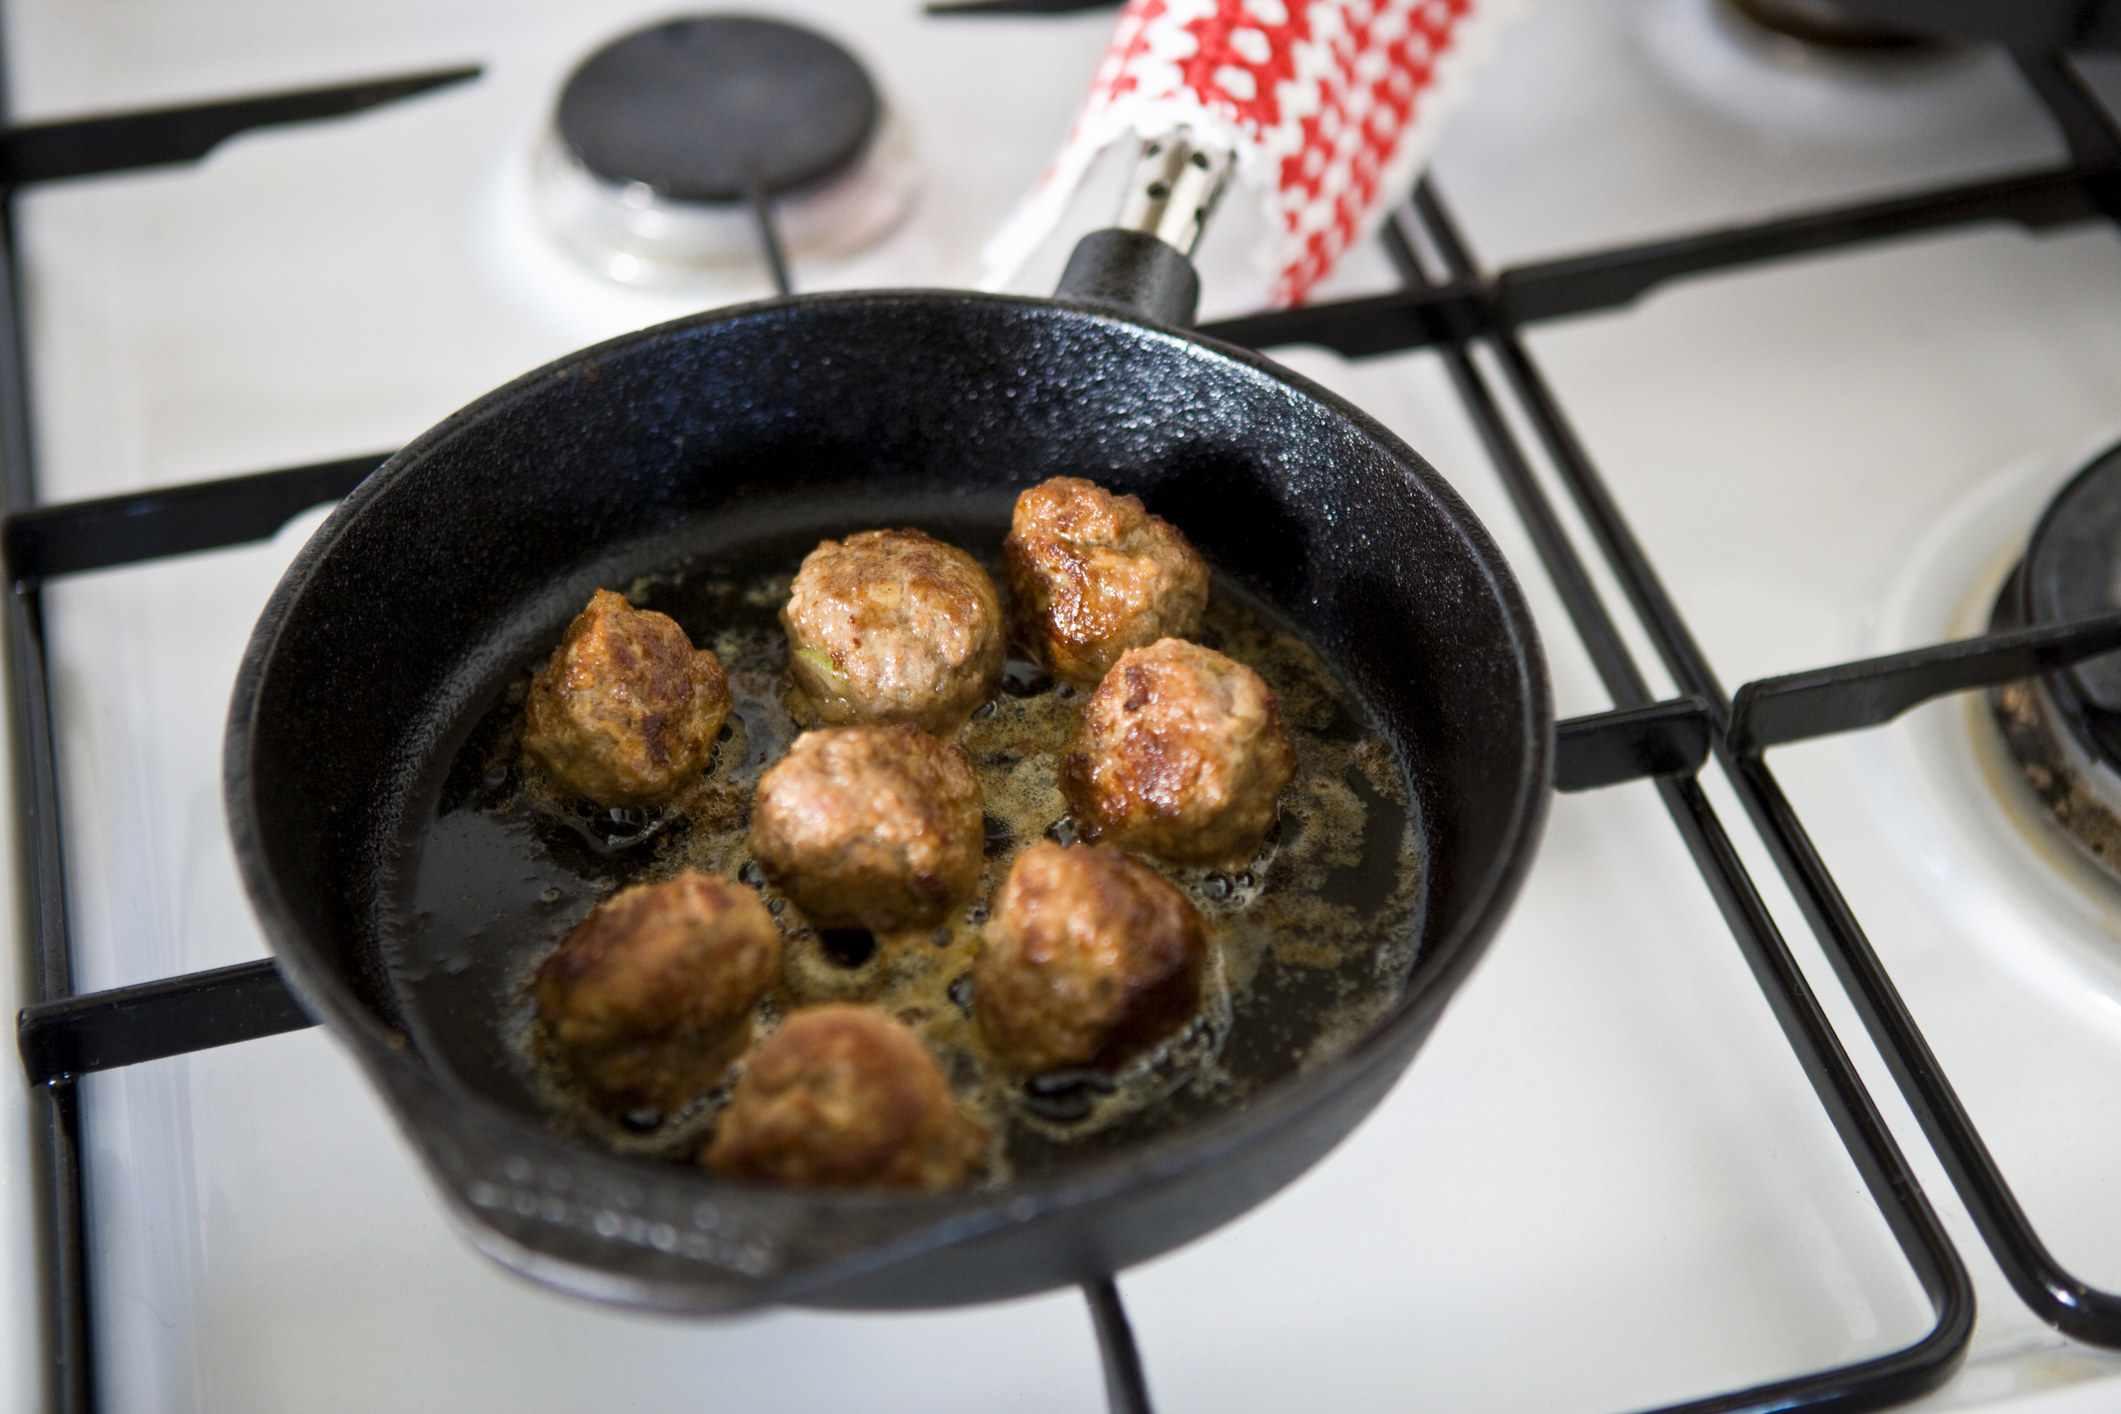 Meatballs cooking in a skillet